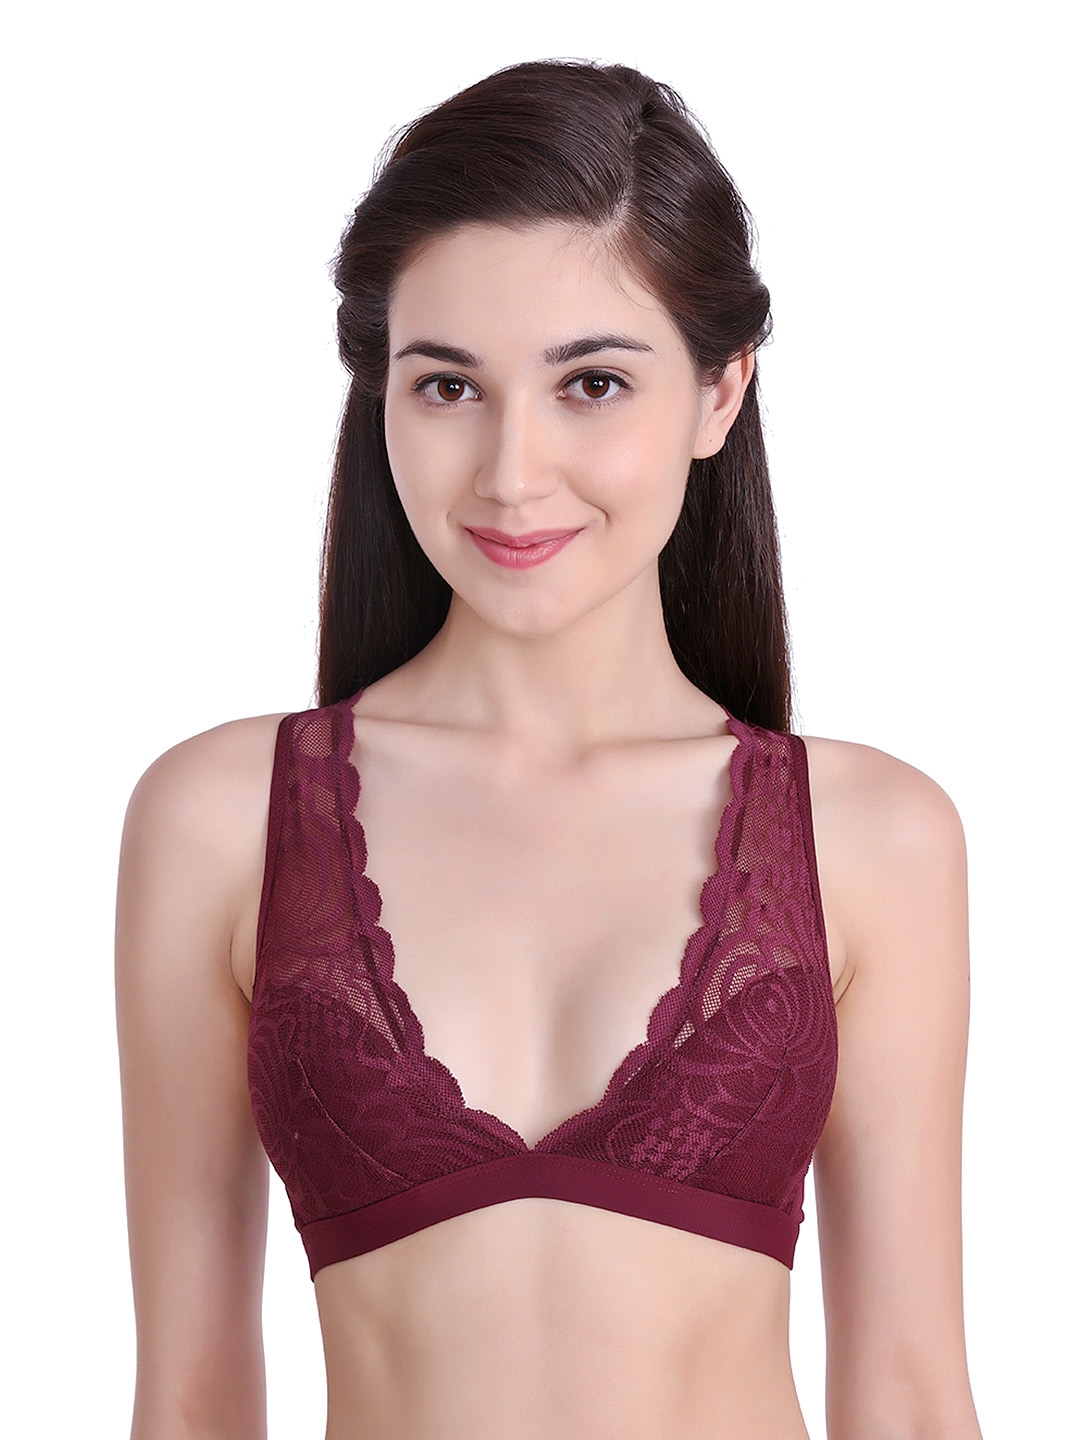 Zivame Girls Double Layered Non Wired Full Coverage Bralette - Love Pink